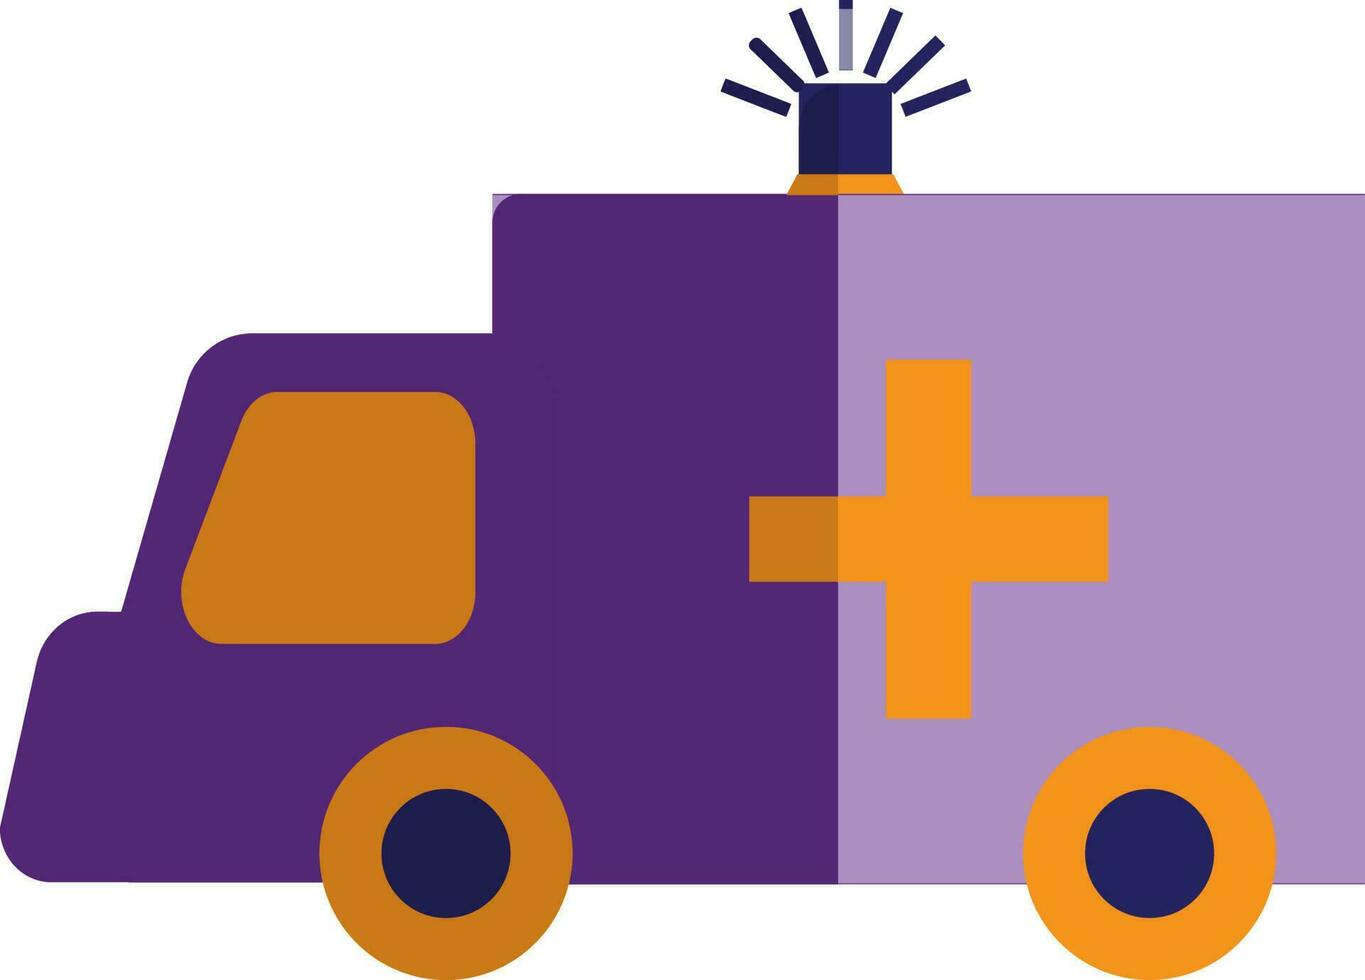 Flat style ambulance in purple and orange color. vector